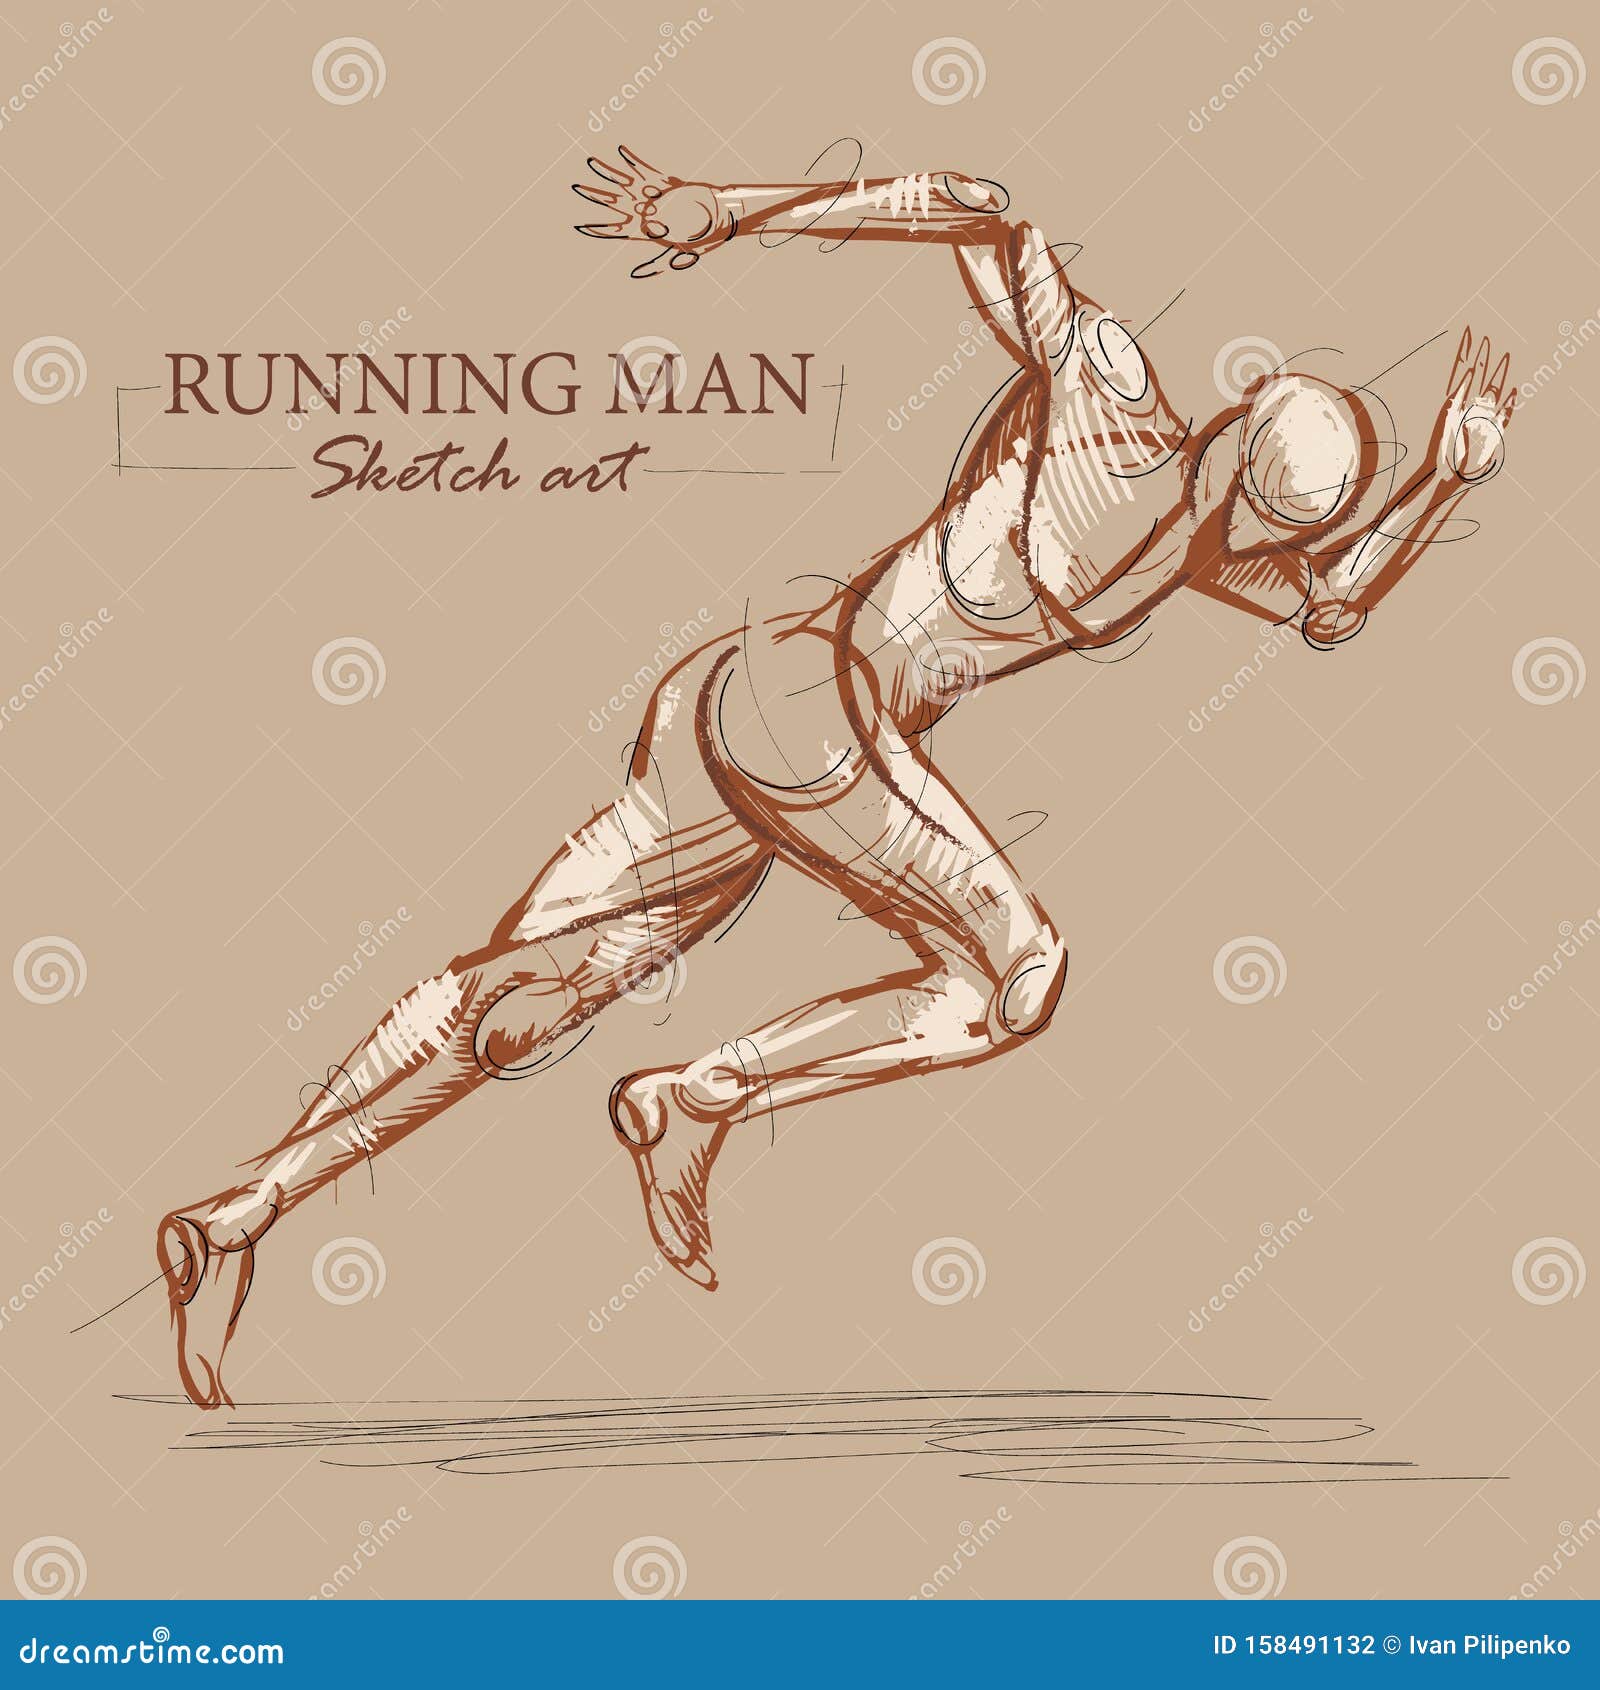 11 Sports sketches ideas  sketches human figure sketches figure sketching